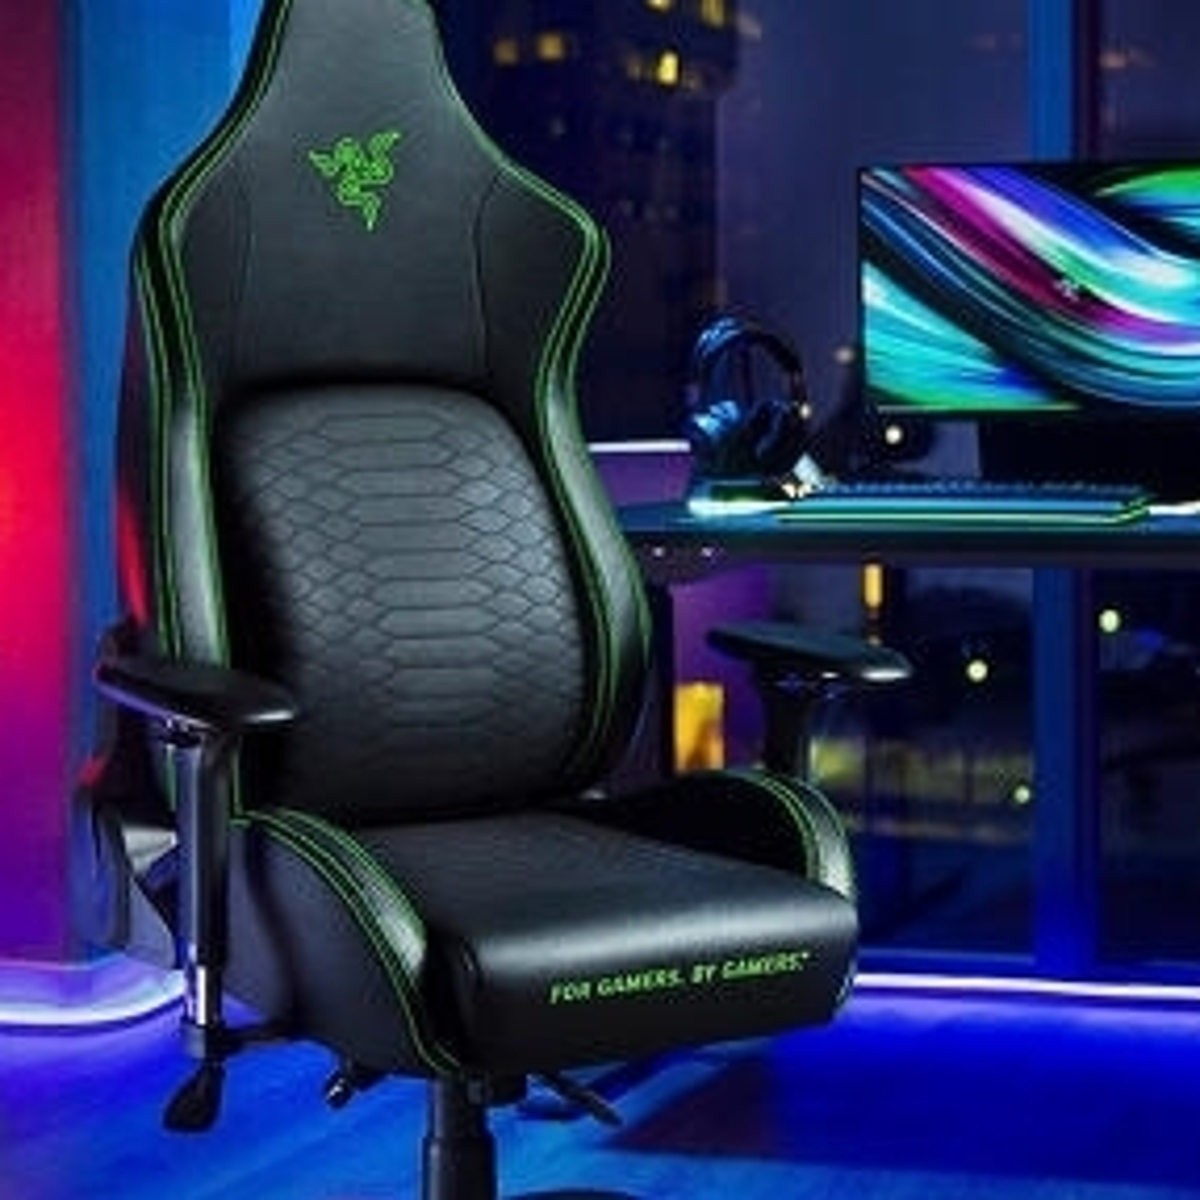 The Razer Iskur gaming chair is on offer for $350 this Black Friday